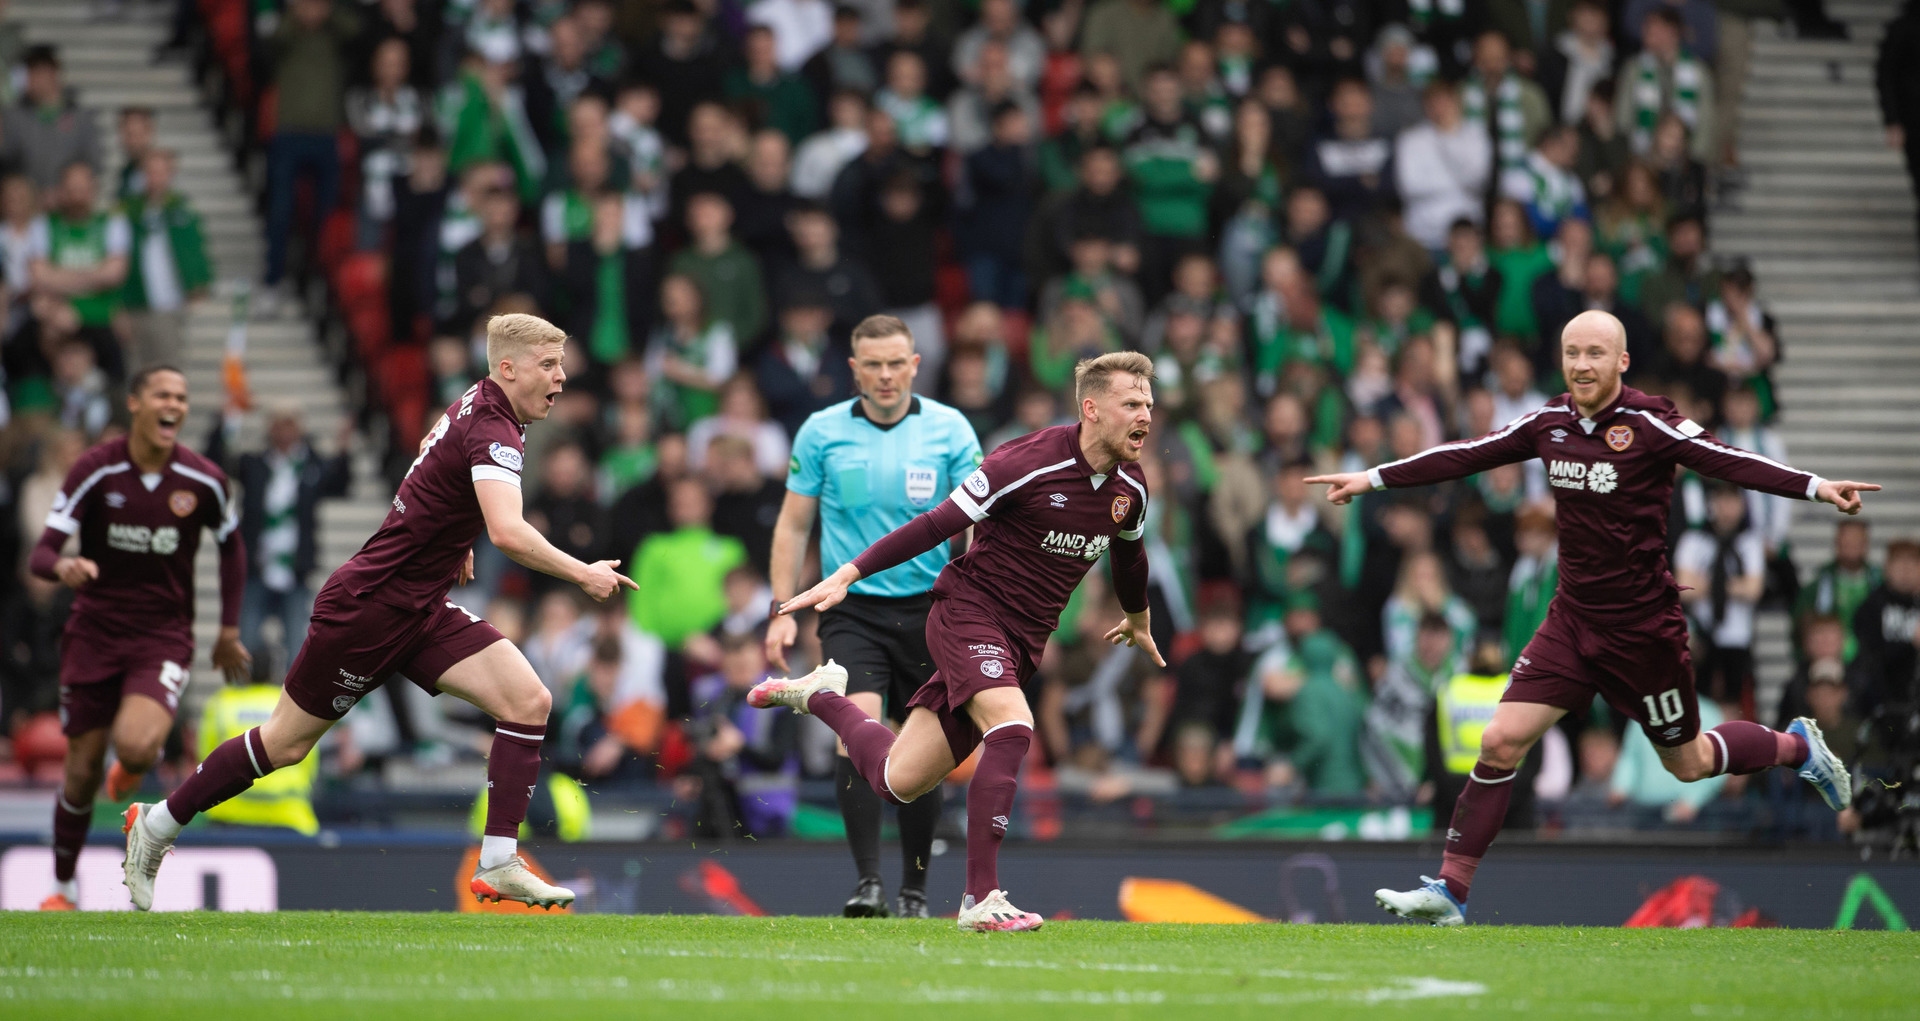 Hearts' Stephen Kingsley celebrates making it 2-0 during a Scottish Cup Semi-Final between Hearts and Hibs at Hampden Park. (Photo by Paul Devlin / SNS Group)